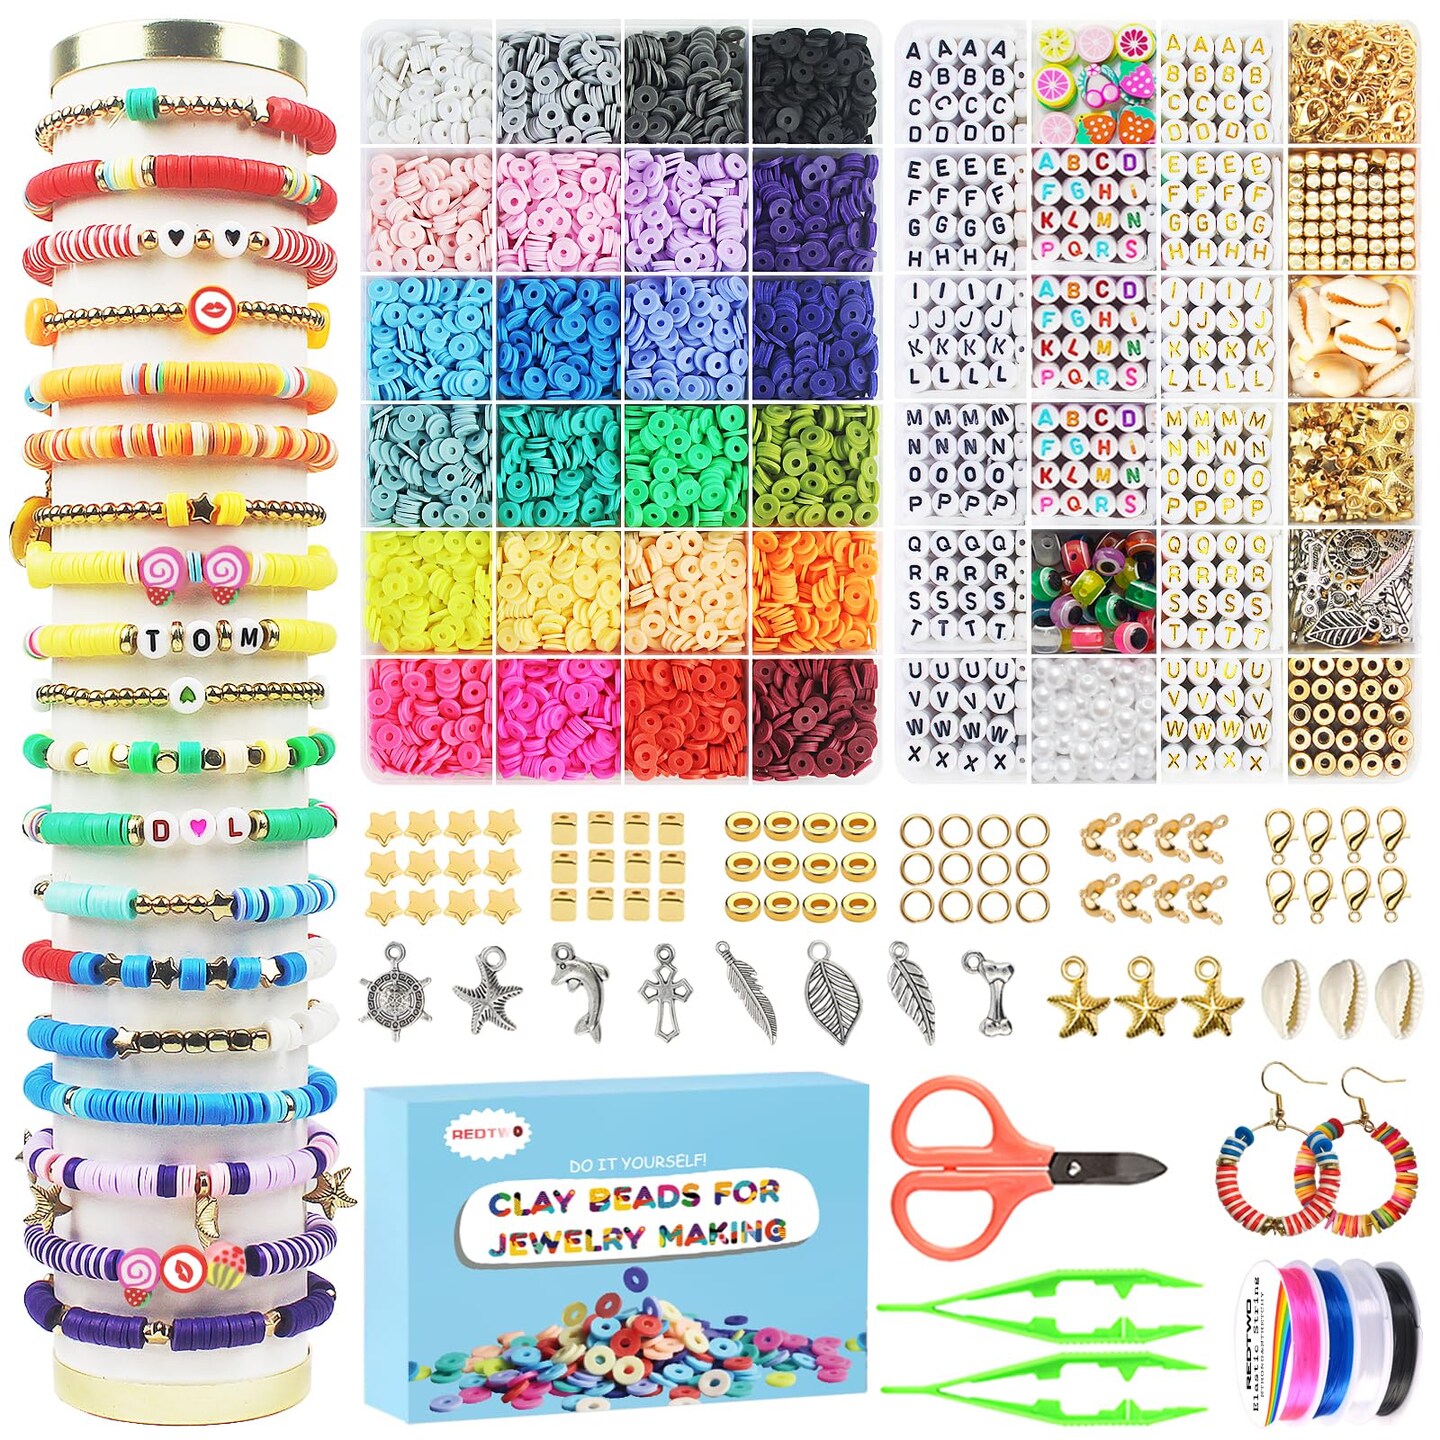 7200 Pcs Clay Beads Bracelet Making Kit, Preppy Friendship Flat Polymer  Heishi Beads Jewelry Kits with Charms and Elastic Strings,Crafts Gifts Set  for Girls Ages 8-12(2 Boxes)